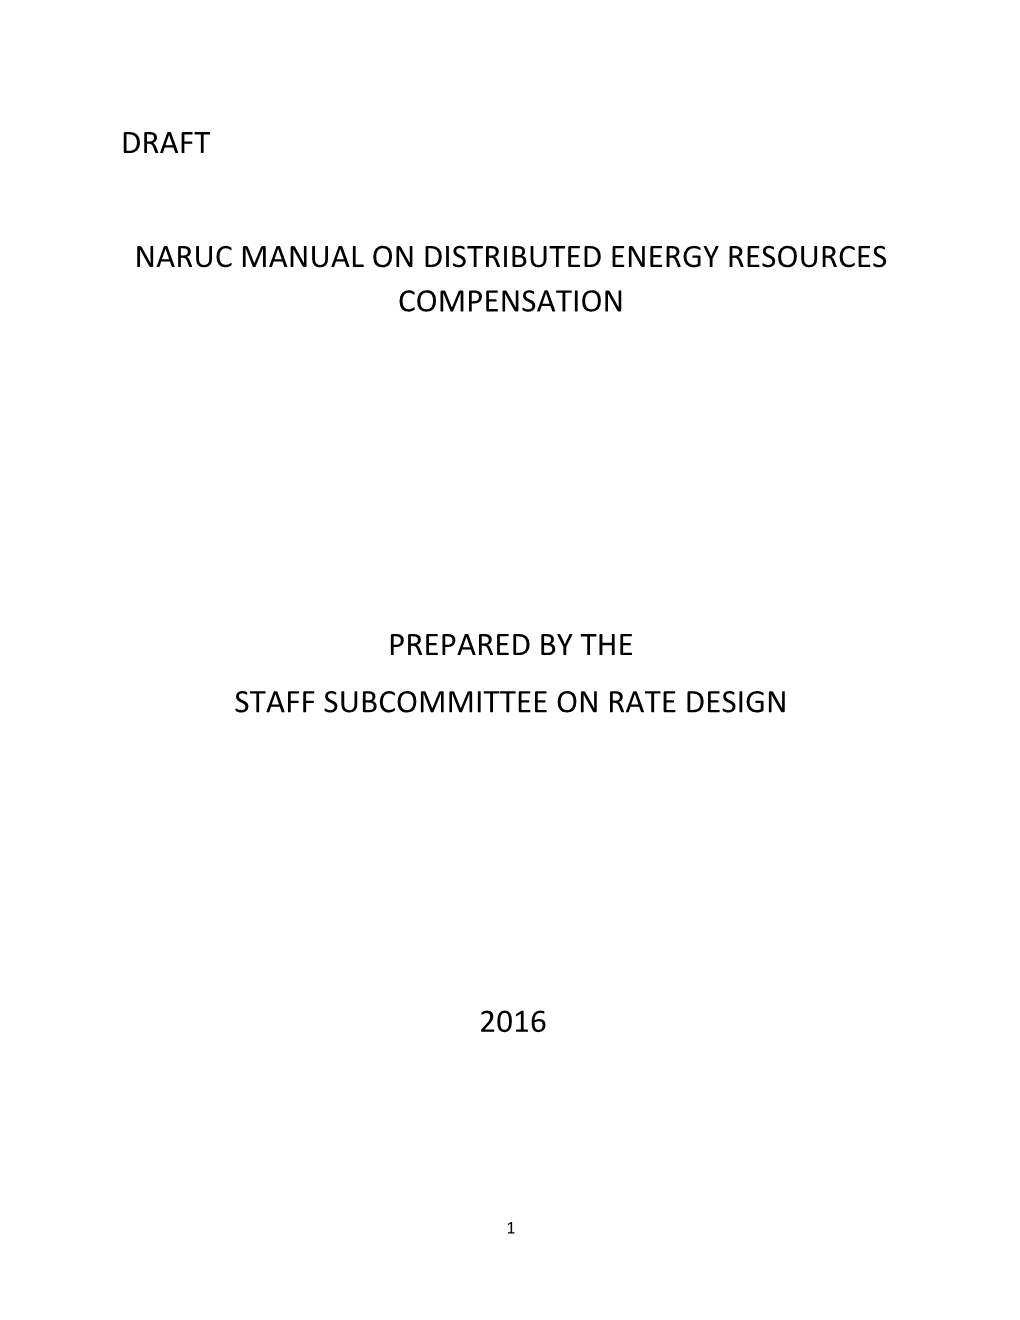 Manual on Distributed Energy Resources Compensation